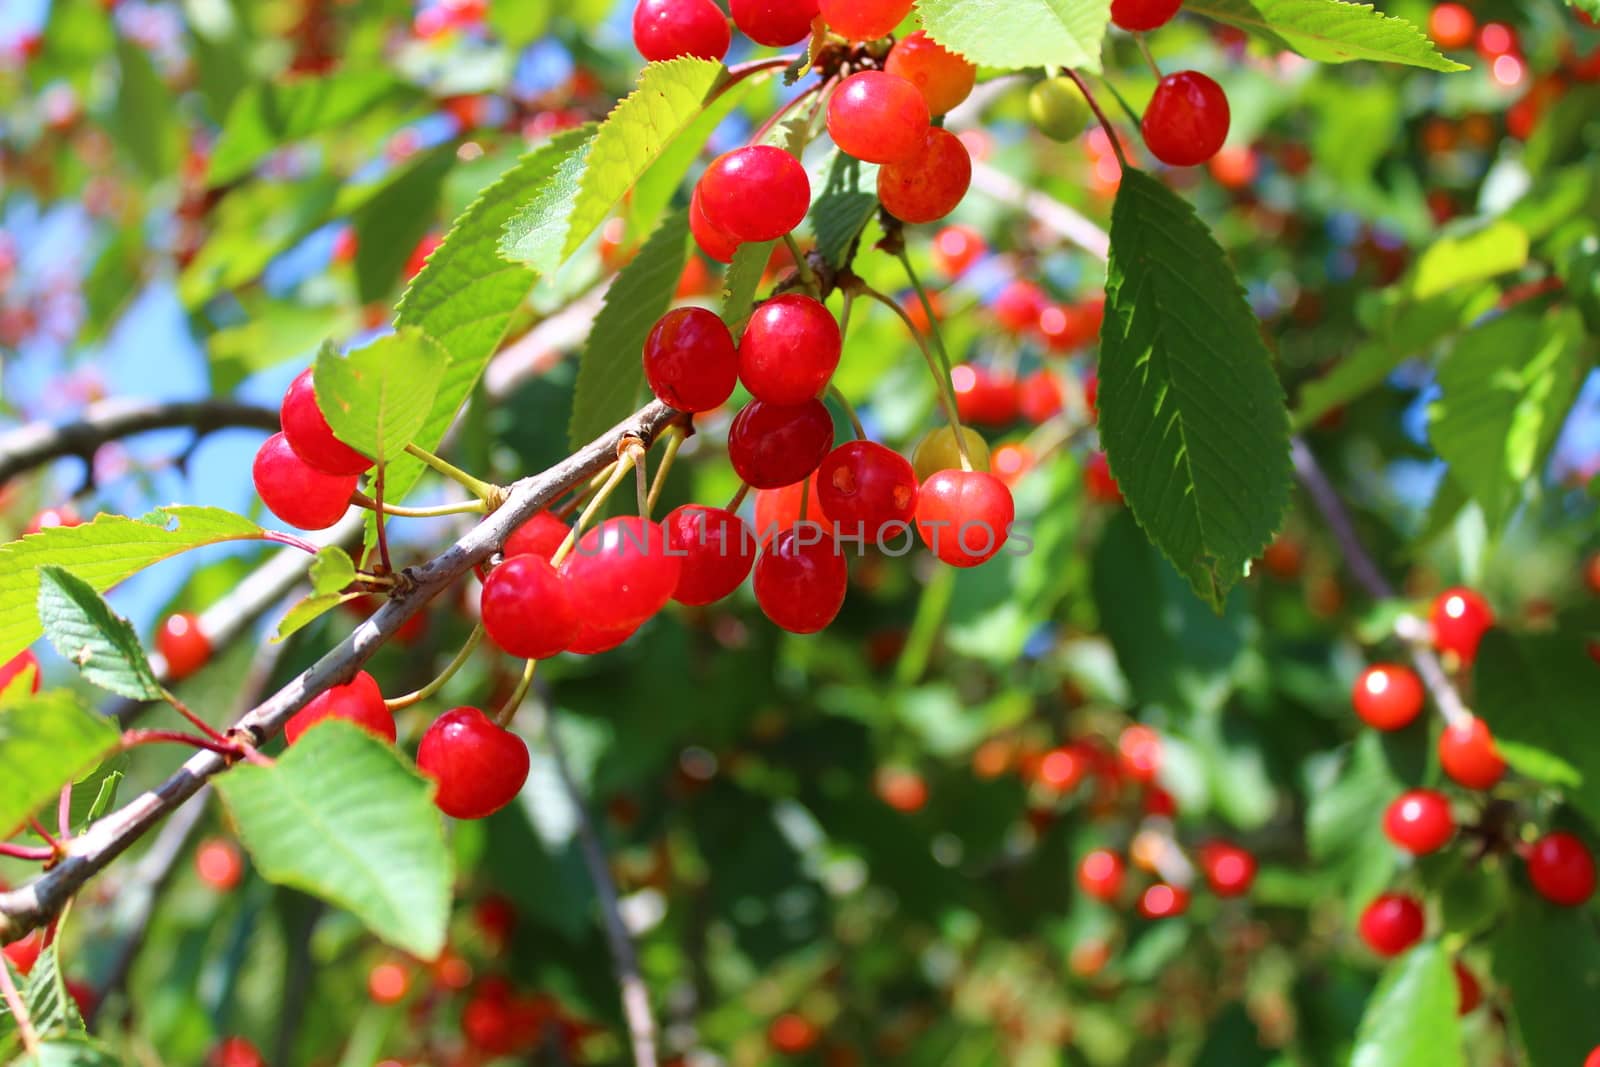 The picture shows wild cherries in the nature